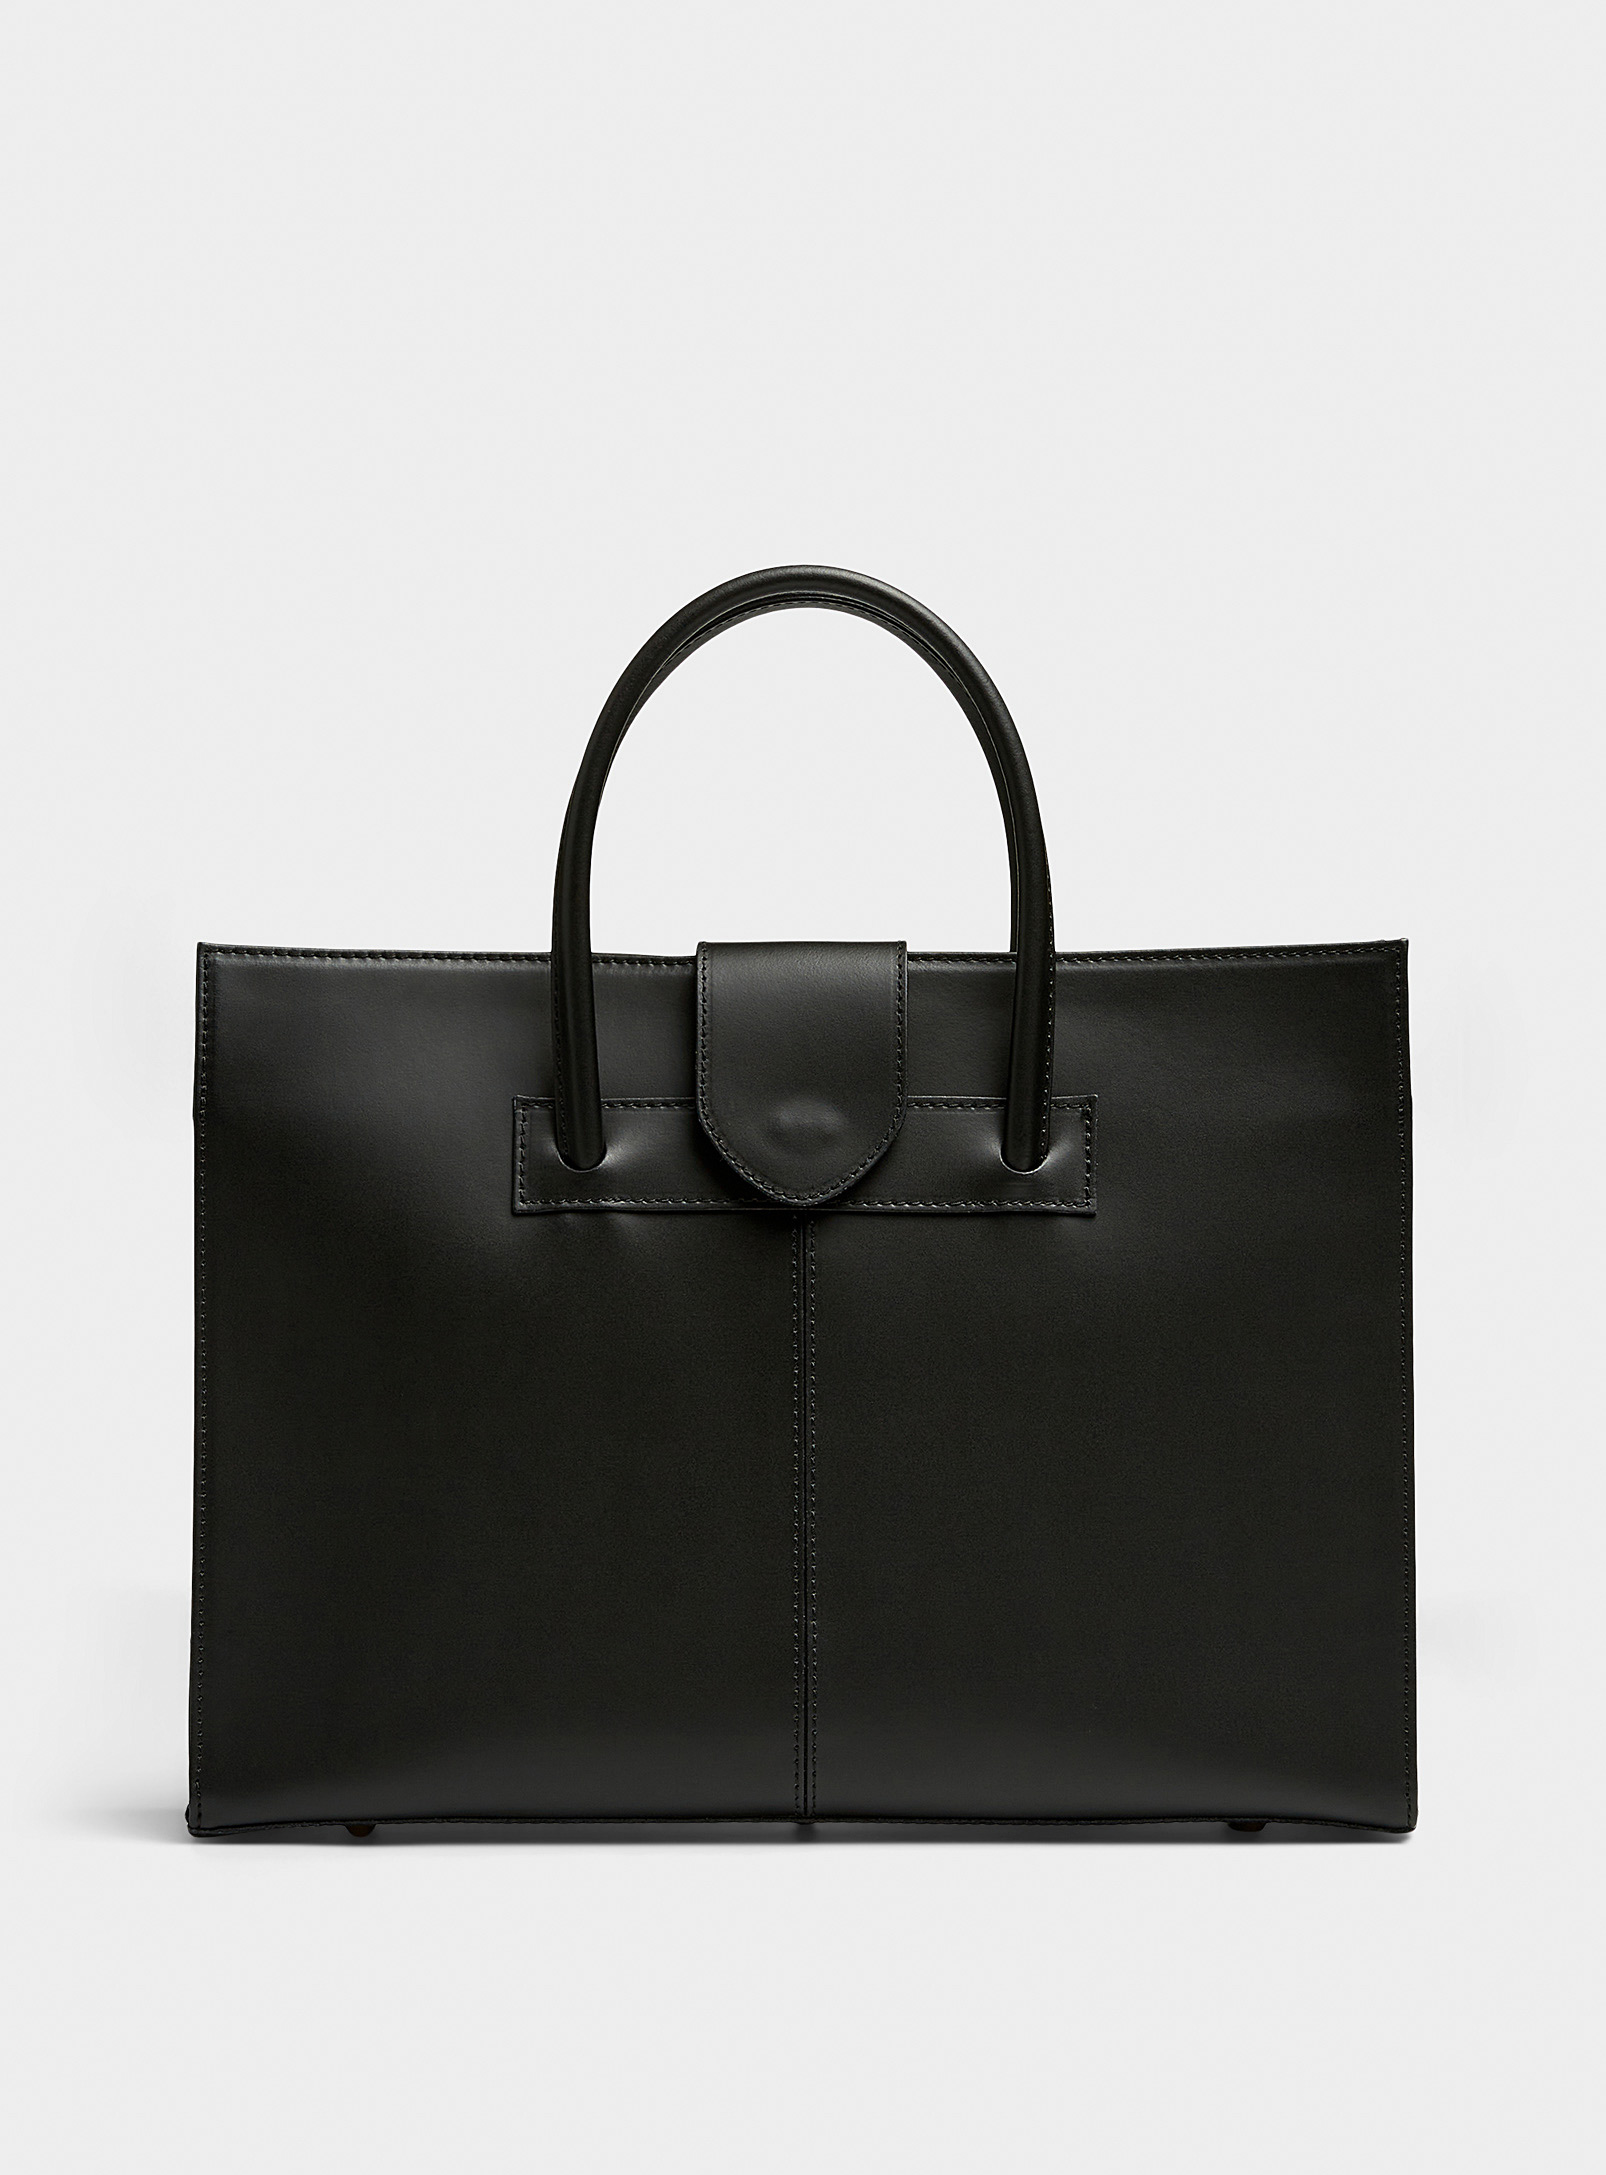 Simons - Women's Topstitched minimalist work Tote Bag Exclusive collection from Italy